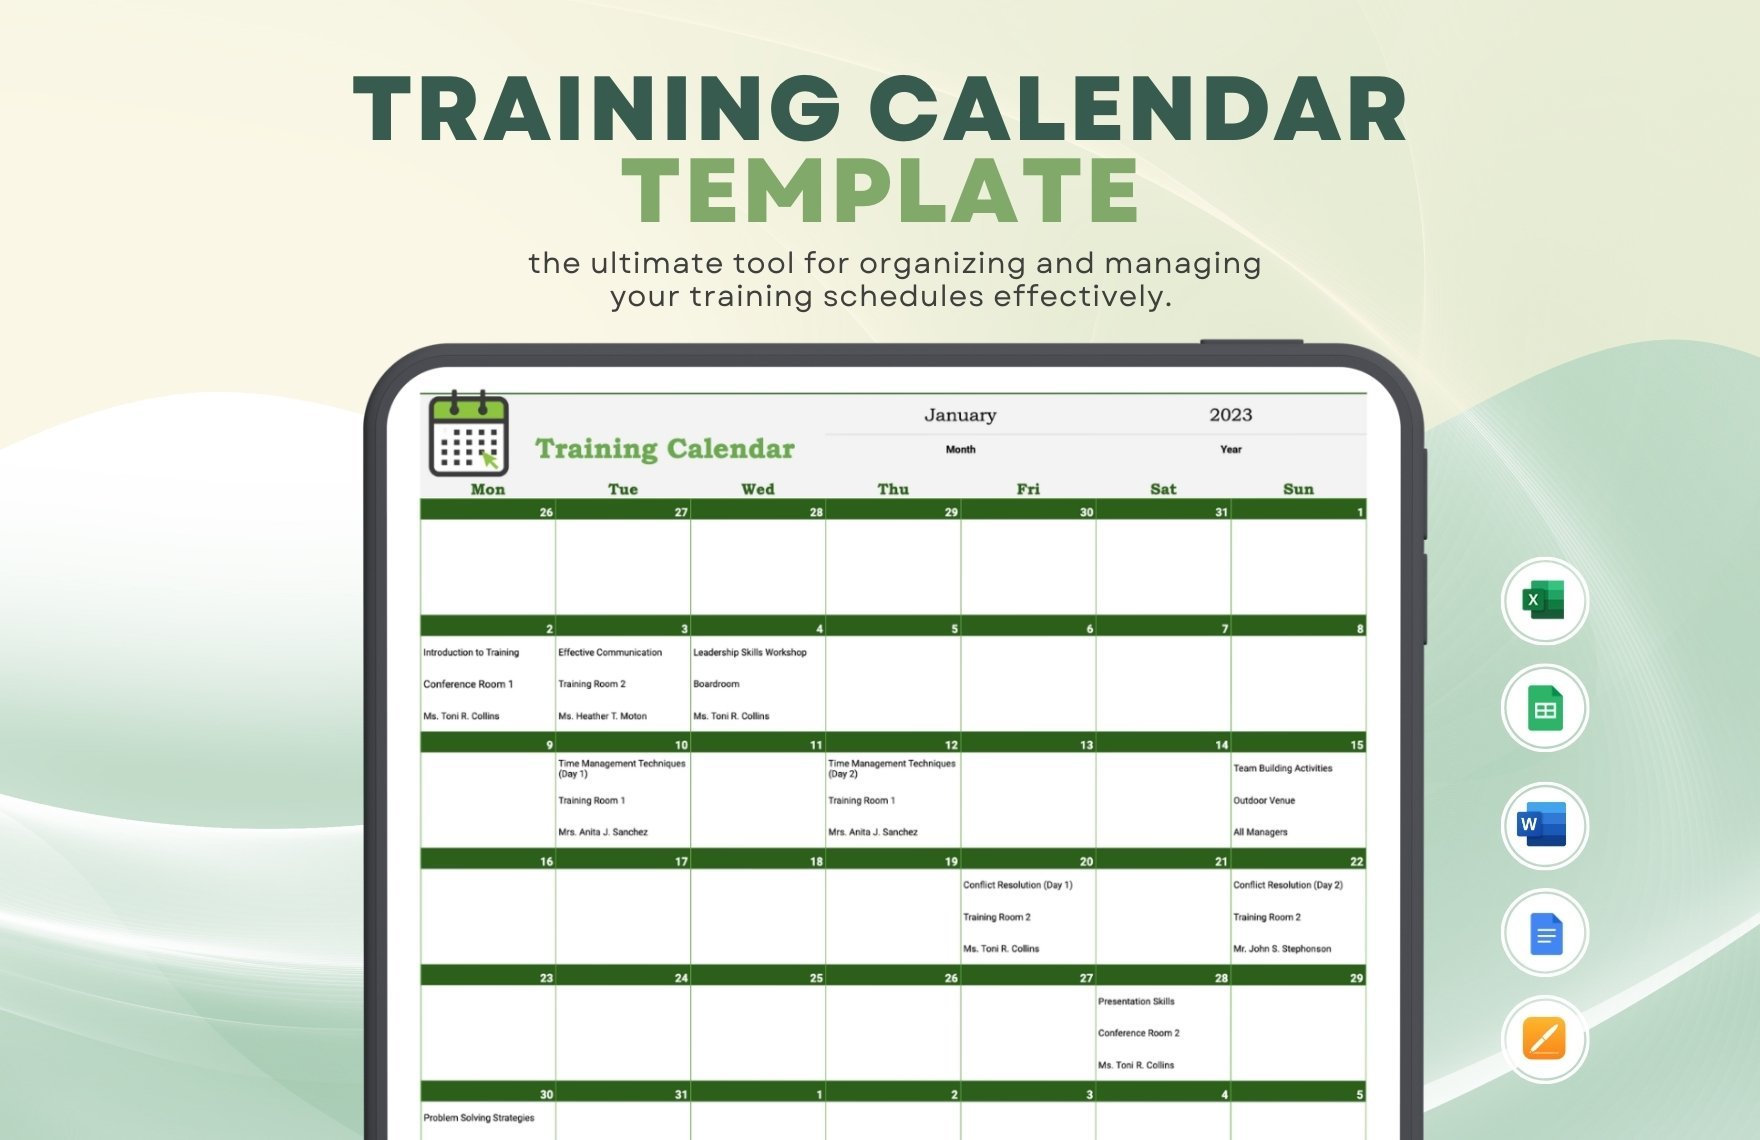 Training Calendar Template in Word, Google Docs, Excel, Google Sheets, Apple Pages